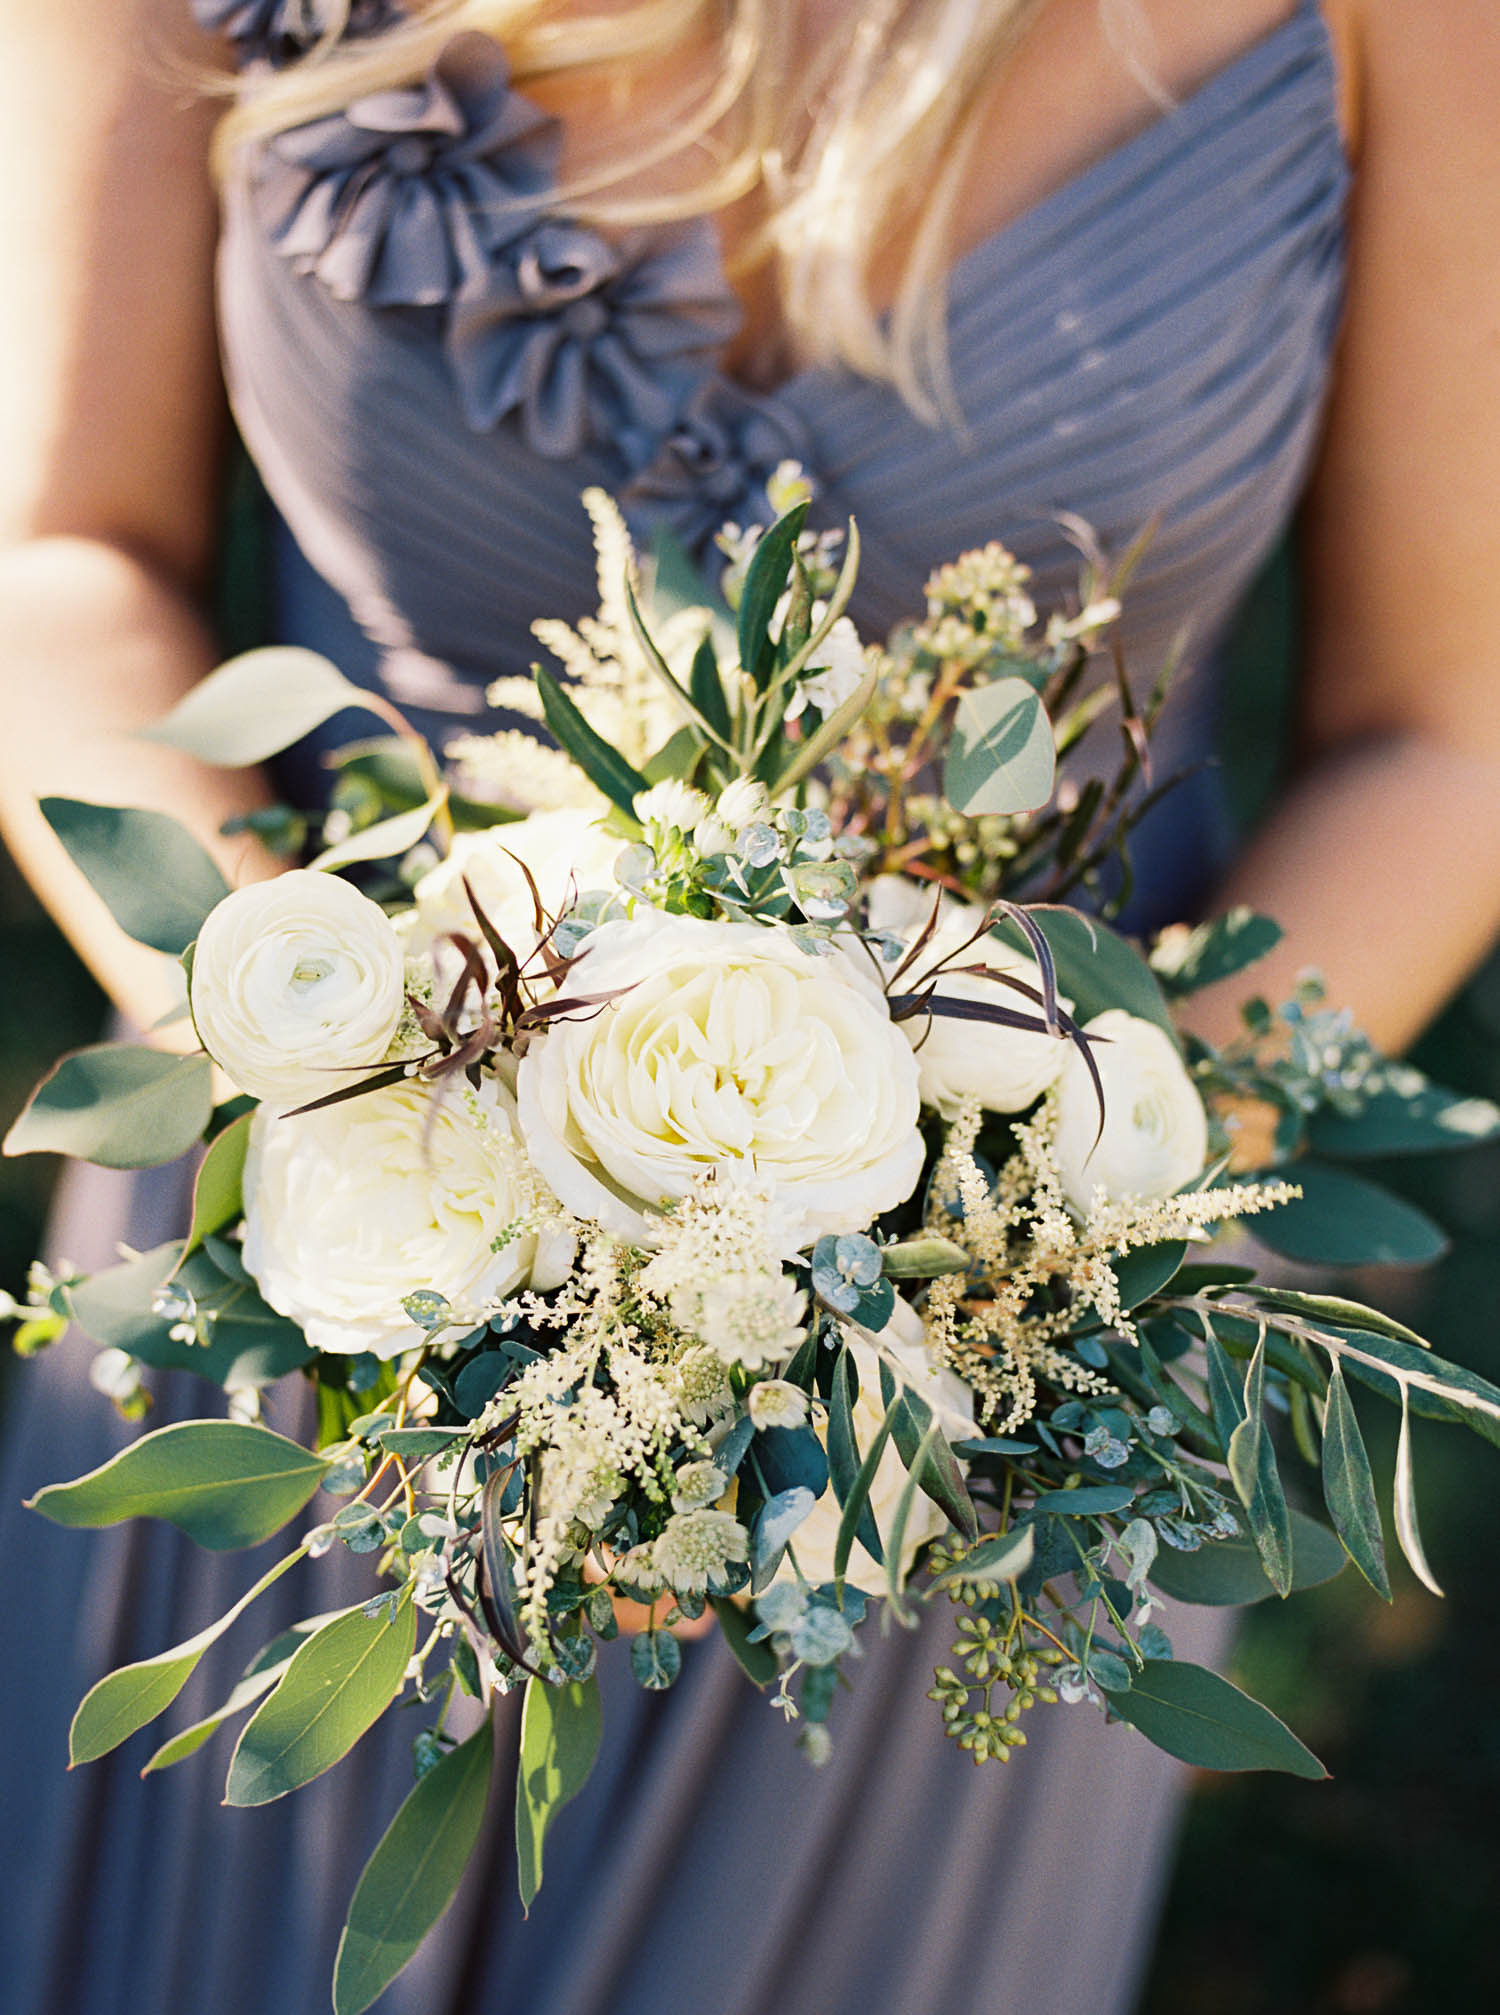 All white and greenery bridesmaid bouquet // Lush floral design